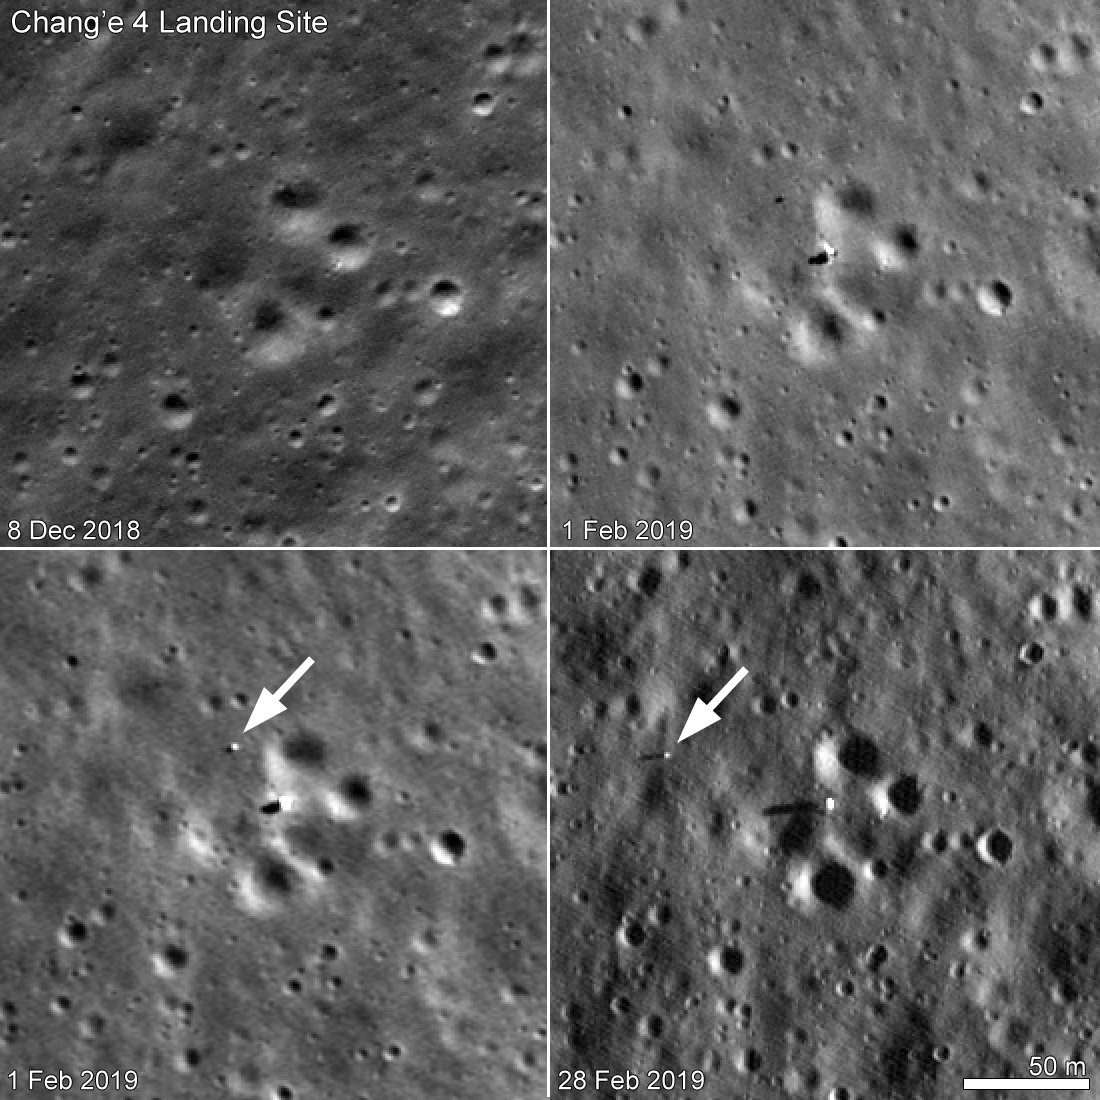 LRO image of the Chang'e 4 lander and Yutu 2 rover that landed on the Moon's far side on Jan. 3, 2019